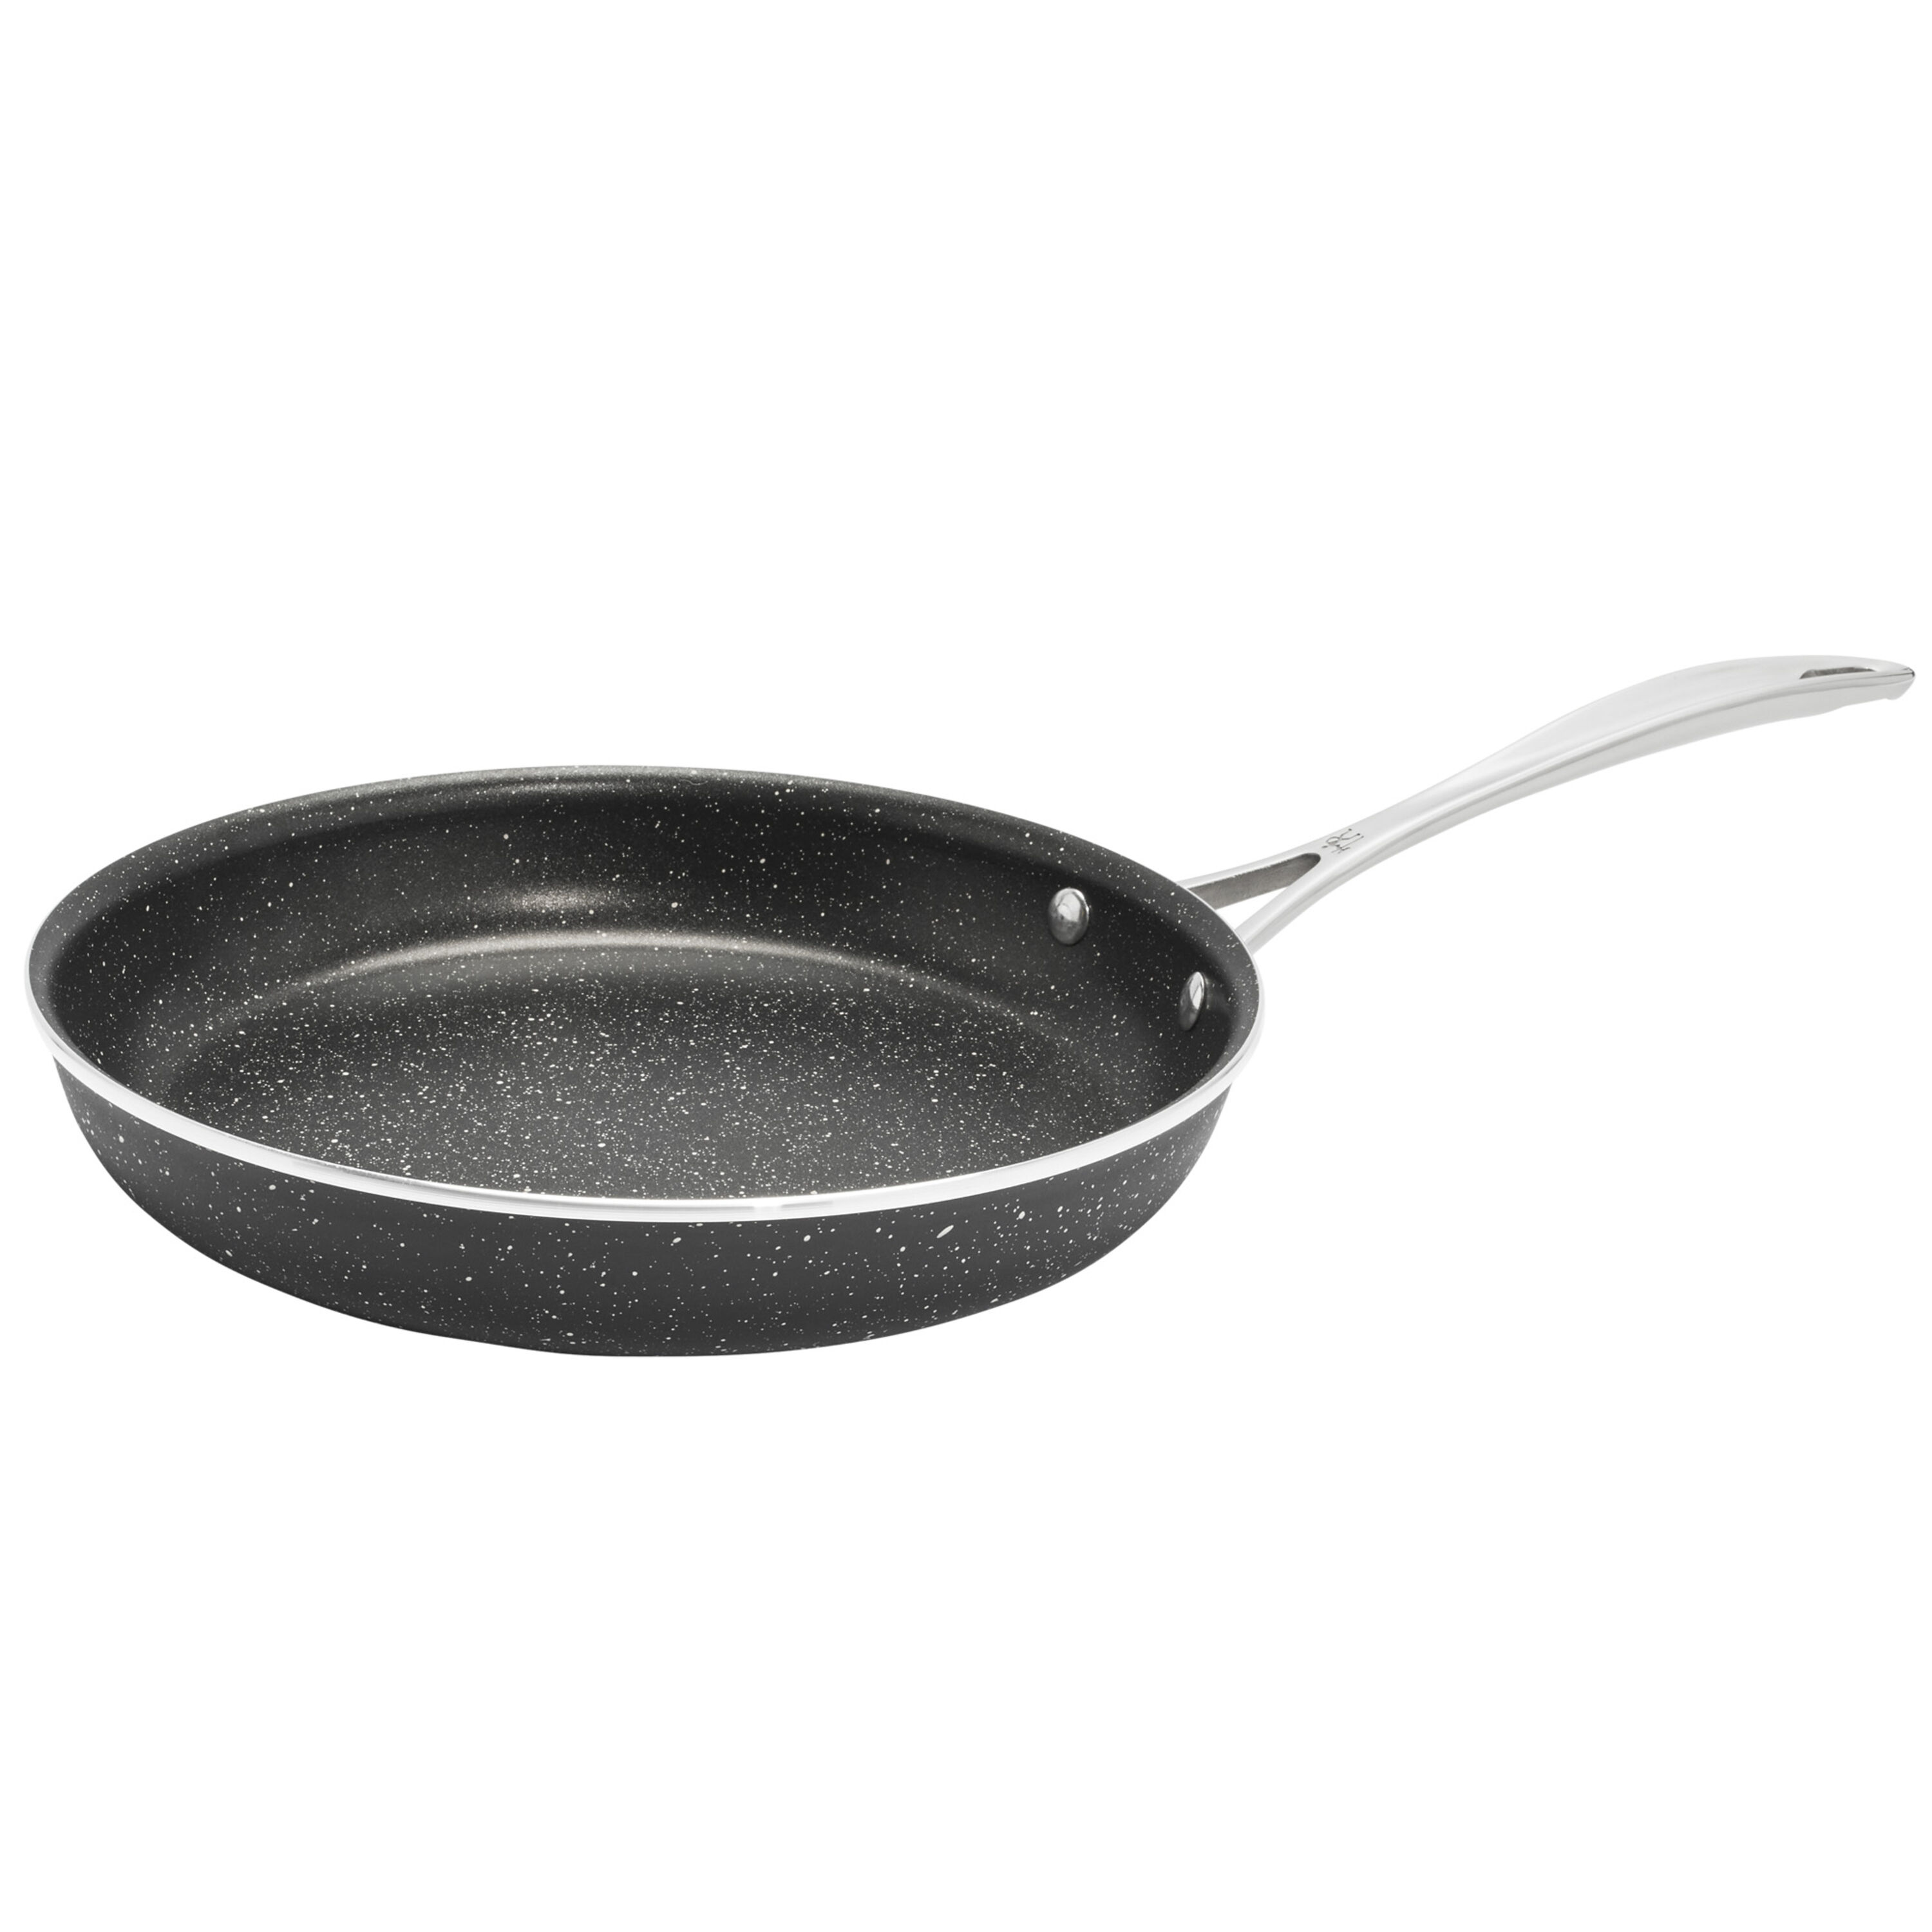 The Rock Tradition Non-Stick Frypan - Set of 2 (Black)